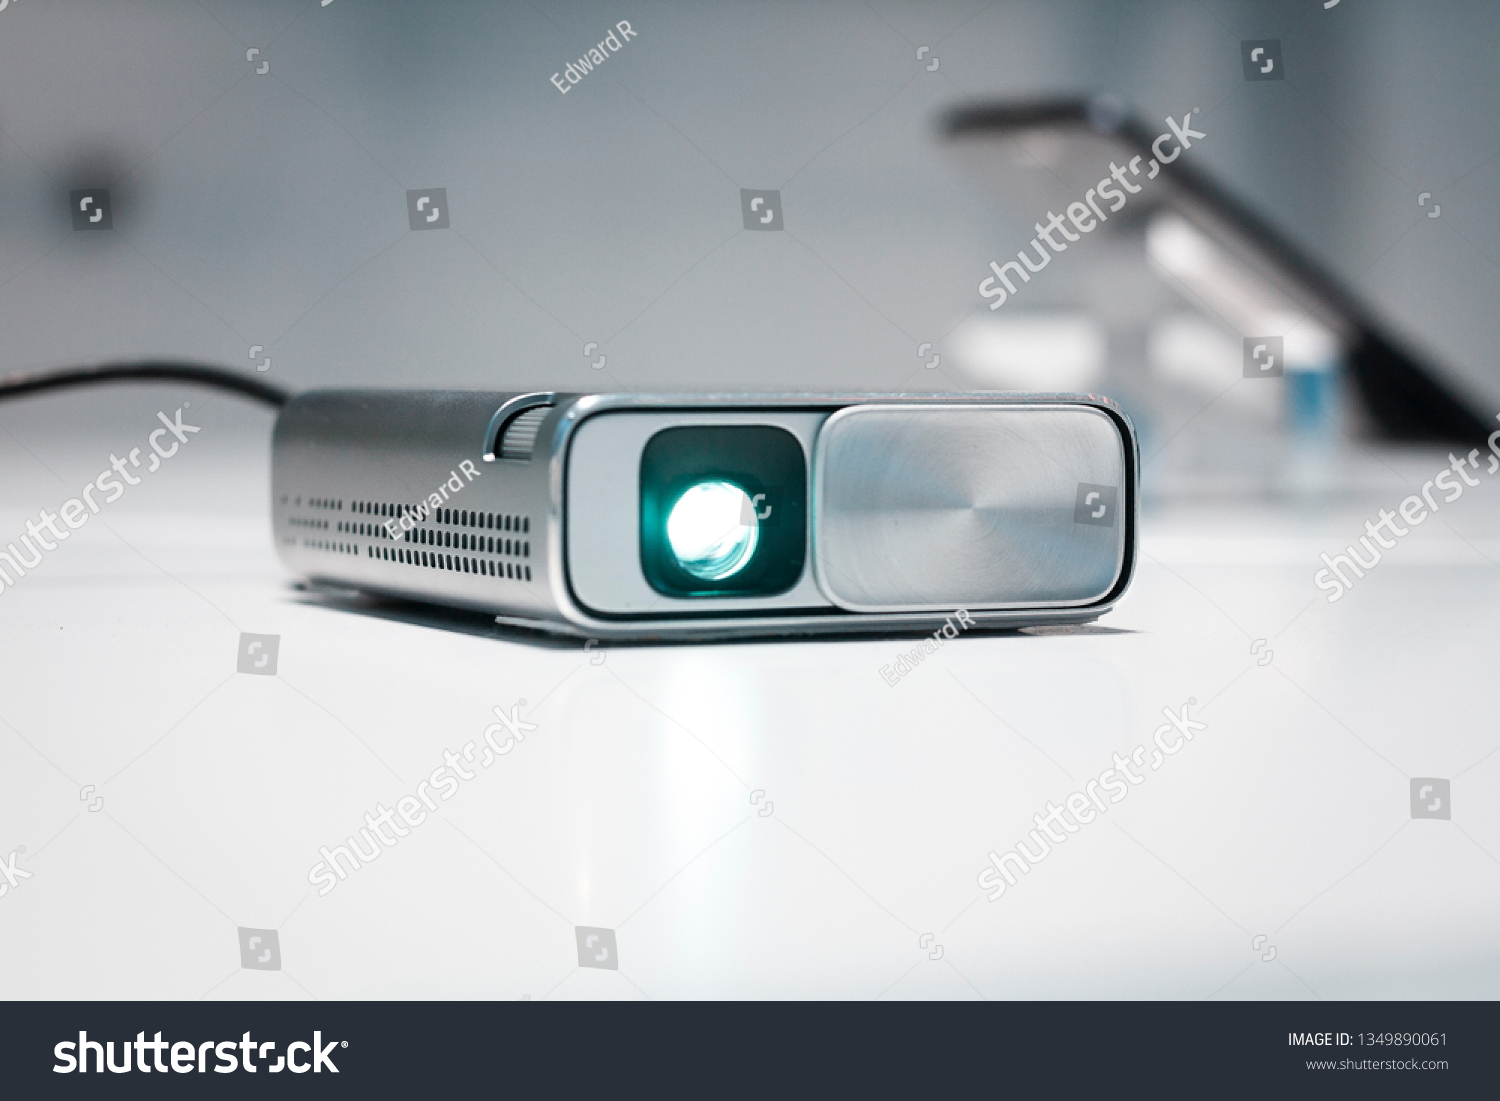 Security and CCTV mini device for any kind of surveillance. Small silver body, high resolution camera sensor, and lens. Futuristic design, spy game. Privacy and personal data issues, pocket projector. #1349890061